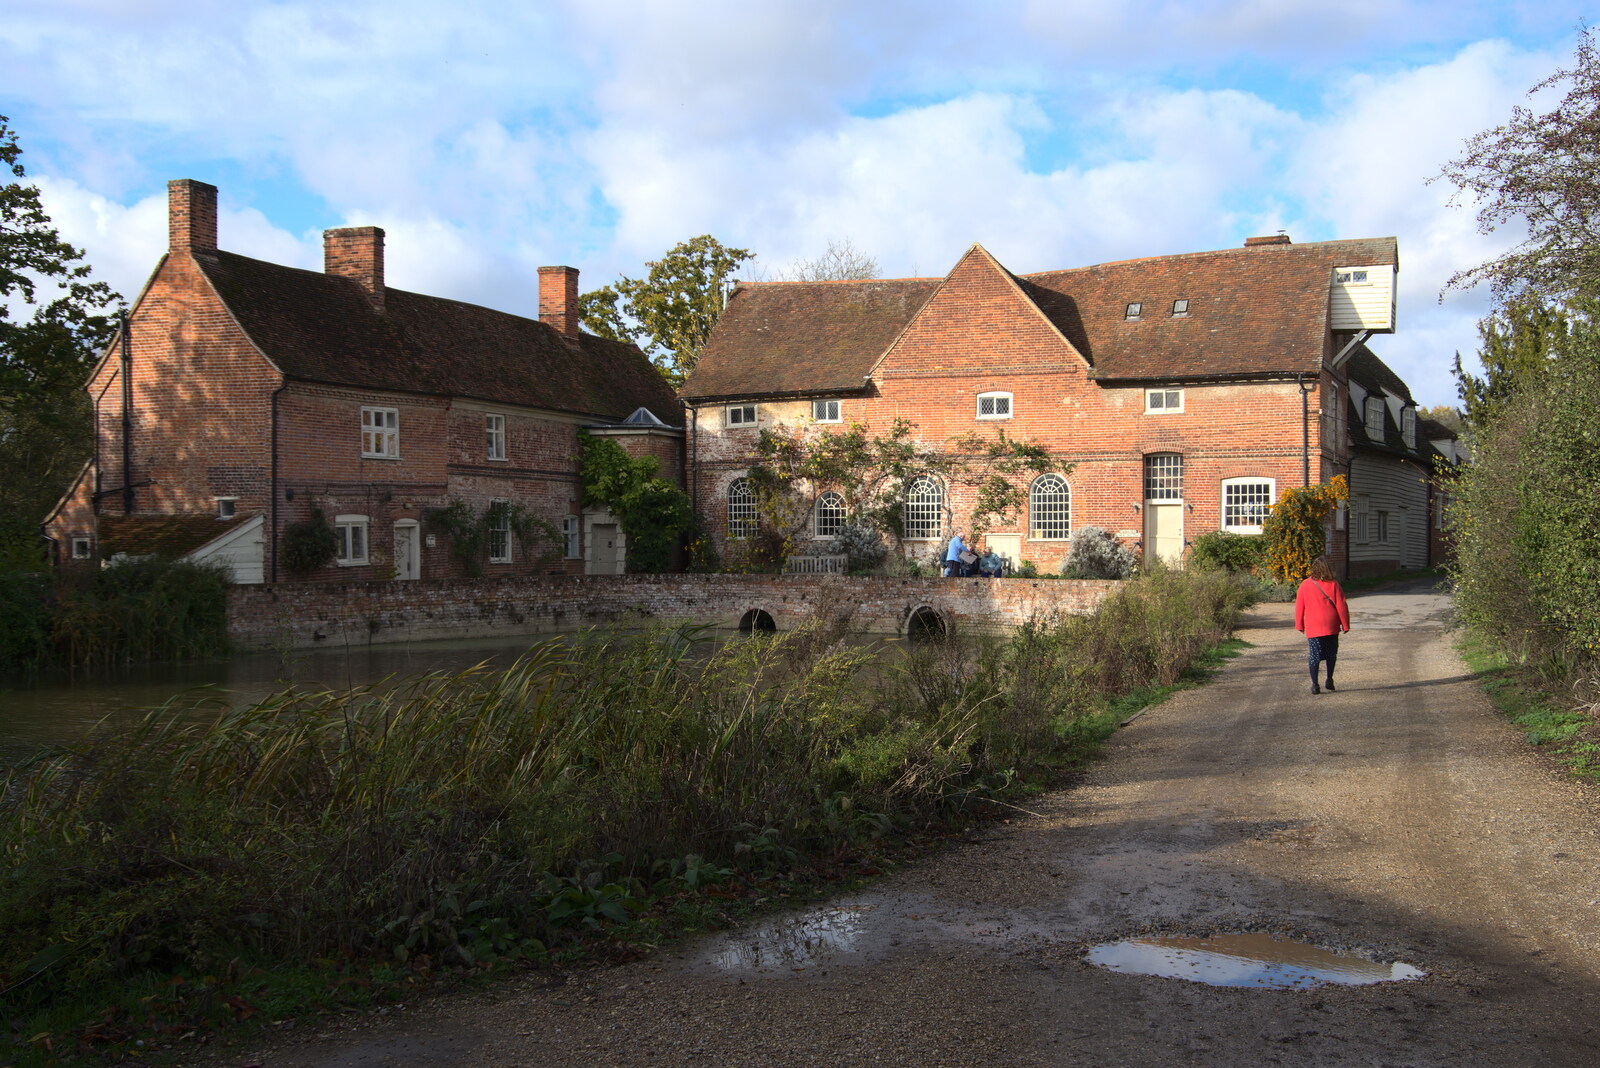 A Postcard from Flatford and Dedham, Suffolk and Essex, 9th November 2022: Flatford Mill 